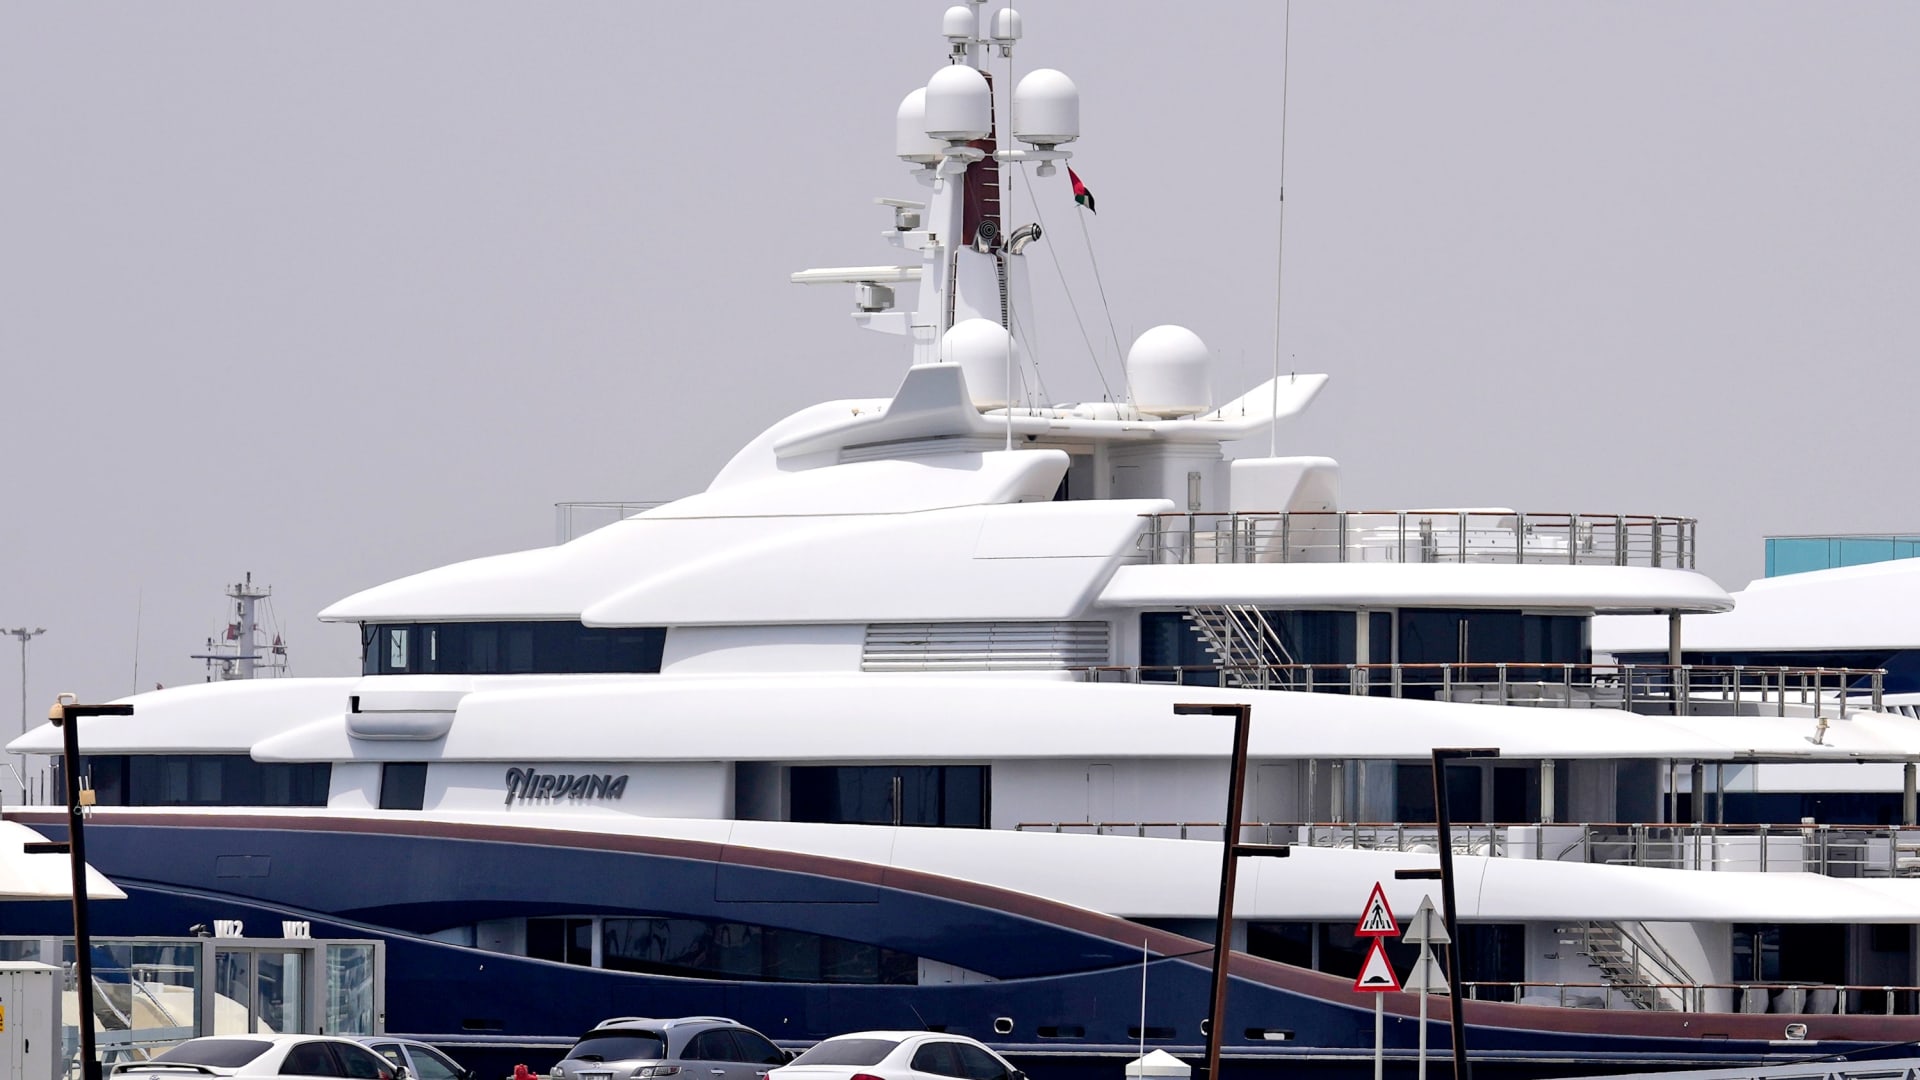 The Nirvana, a sleek 88-meter-long superyacht worth about $300 million, owned by Vladimir Potanin, head of the world's largest refined nickel and palladium producer in Russia, is docked at Port Rashid terminal in Dubai, United Arab Emirates, Tuesday, June 28, 2022.